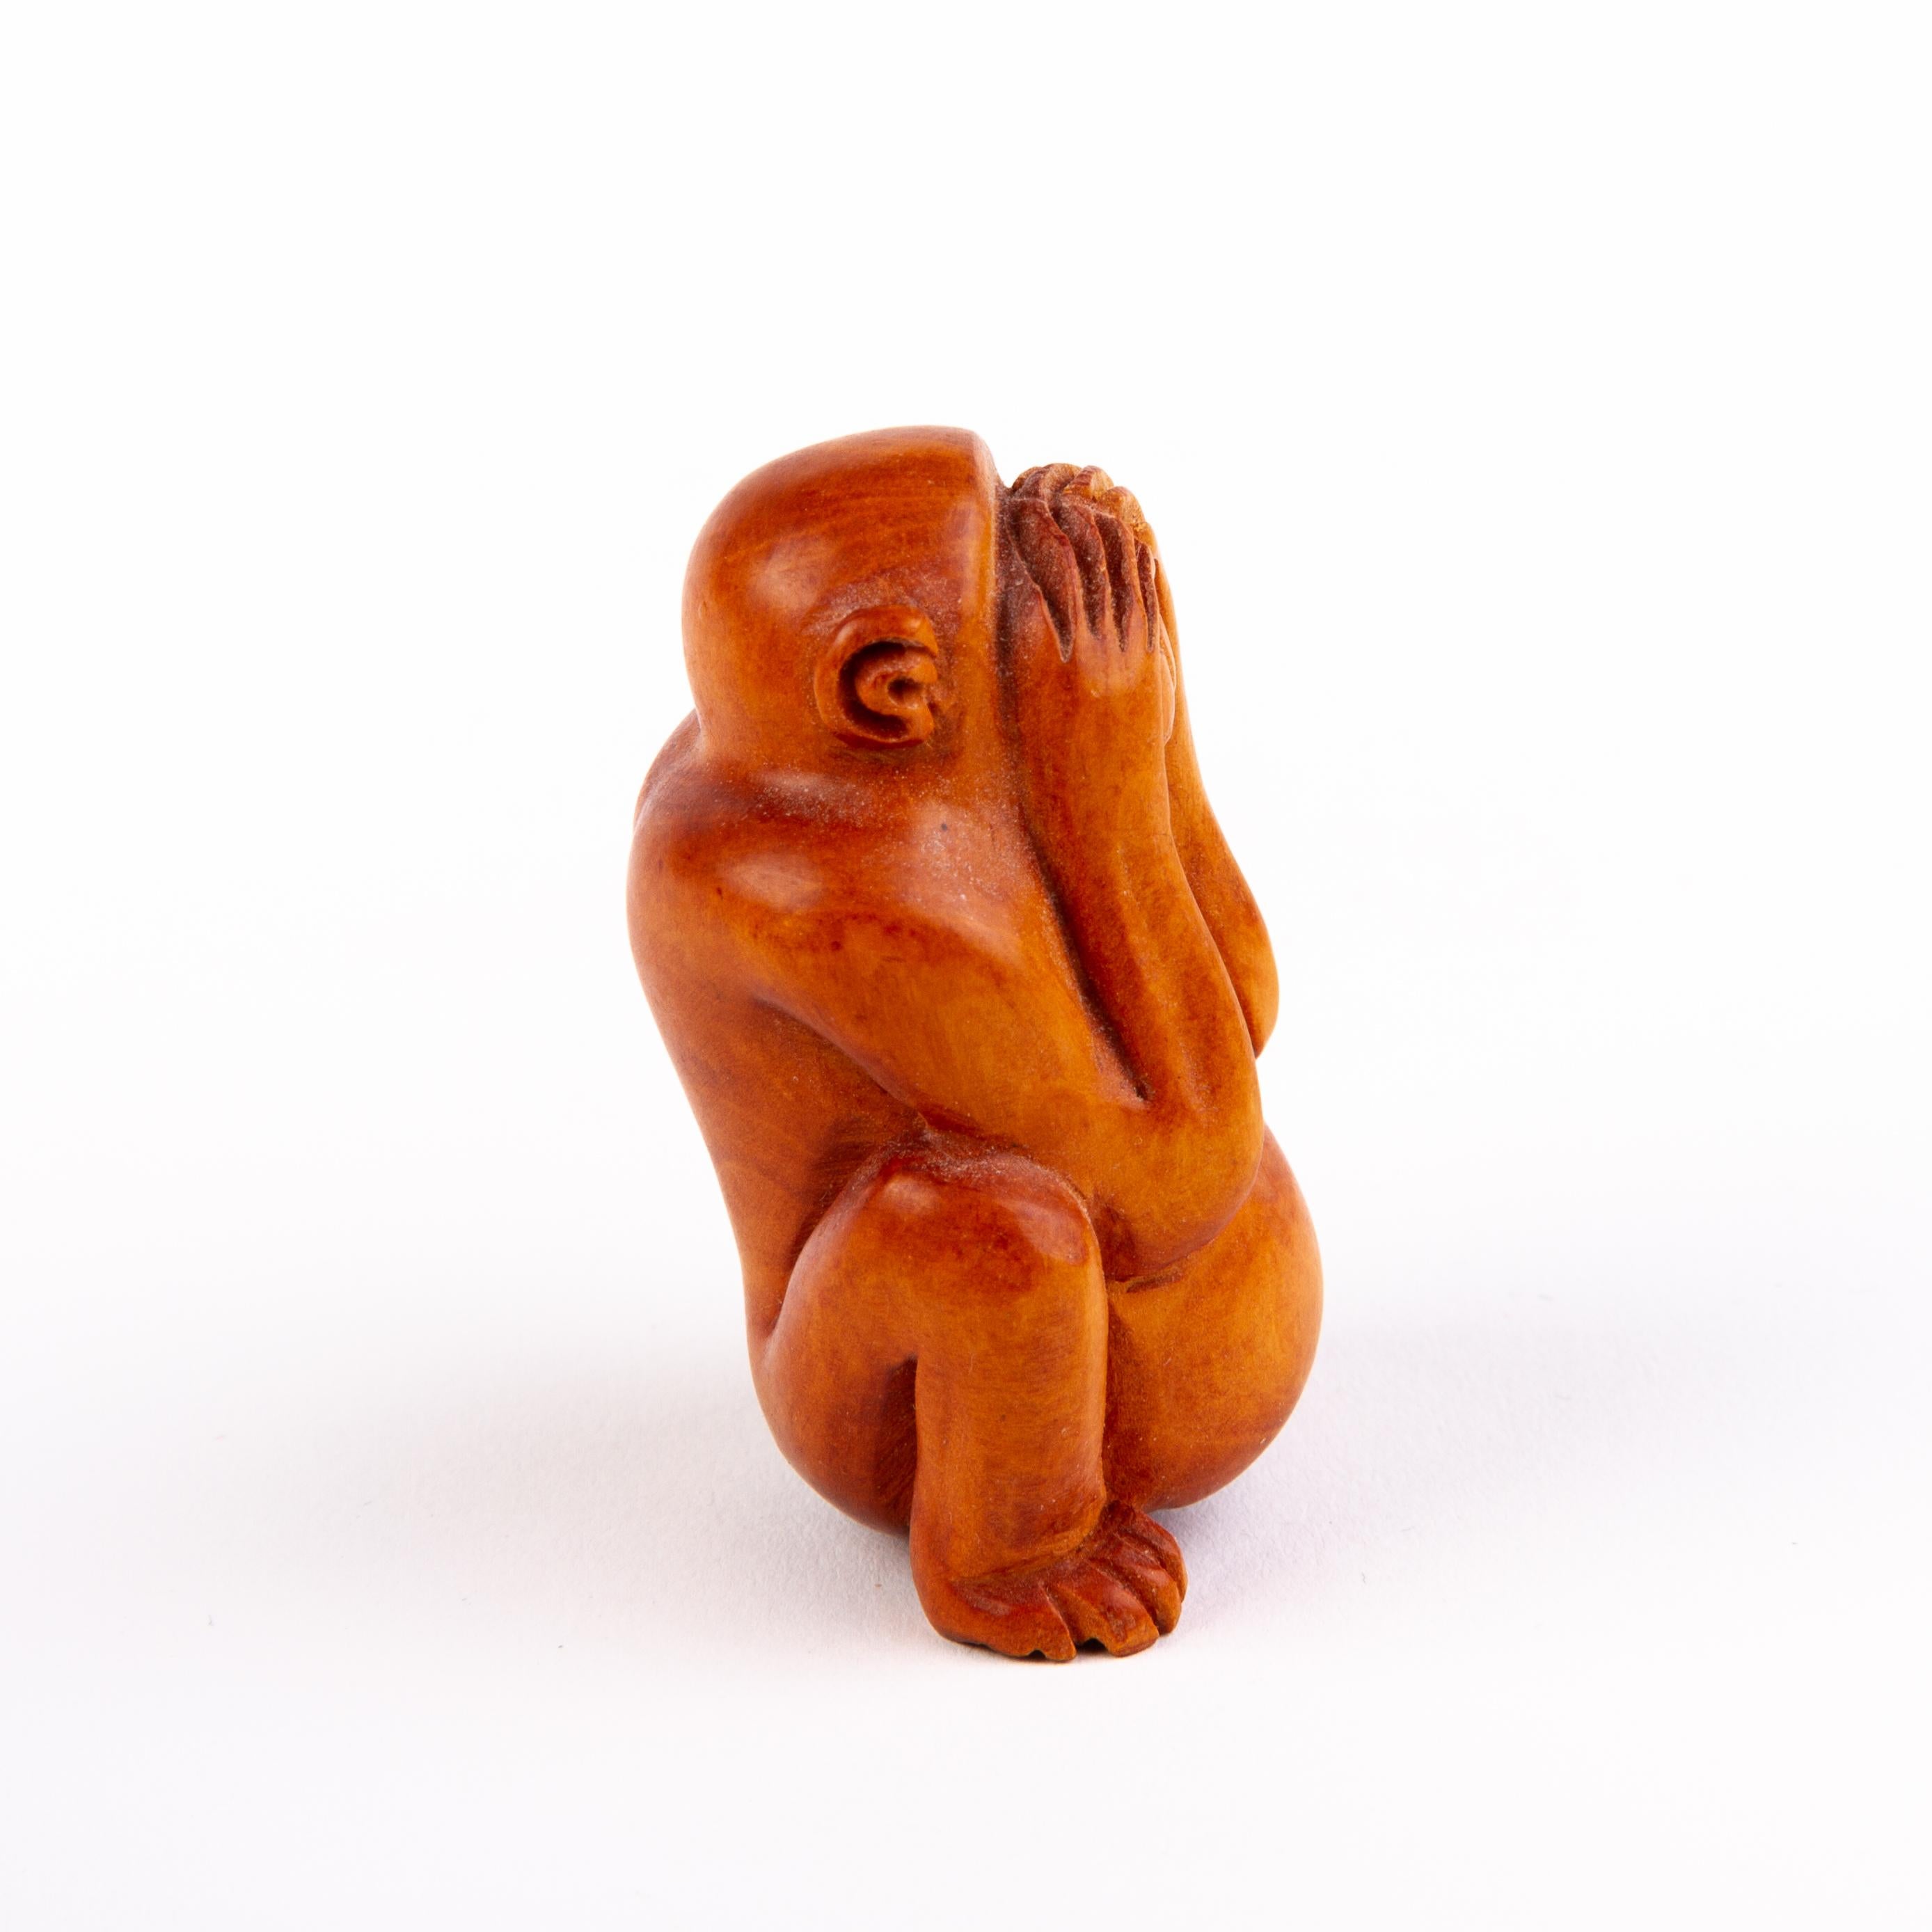 In good condition
From a private collection
Free international shipping
Signed Japanese Boxwood Netsuke Inro of Monkey 